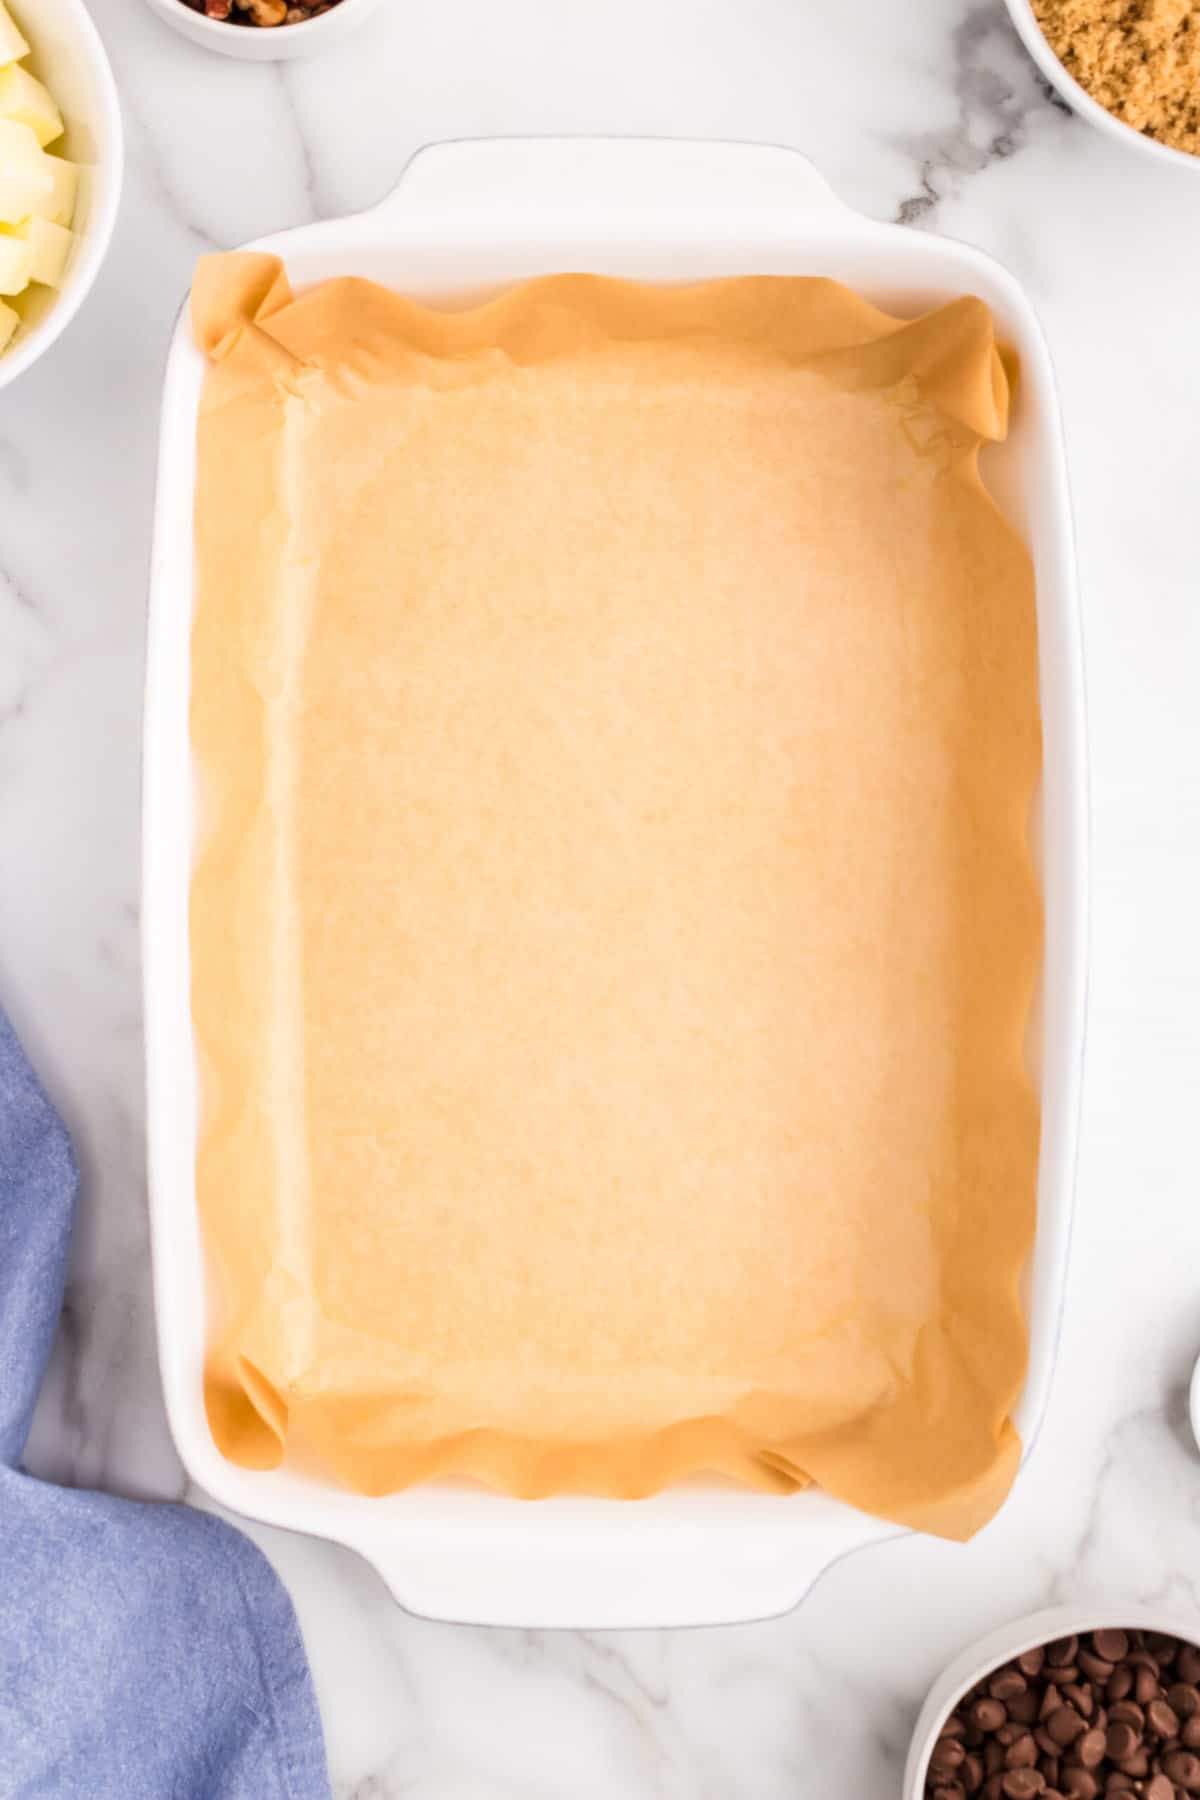 Lining baking pan with parchment paper for Toffee recipe